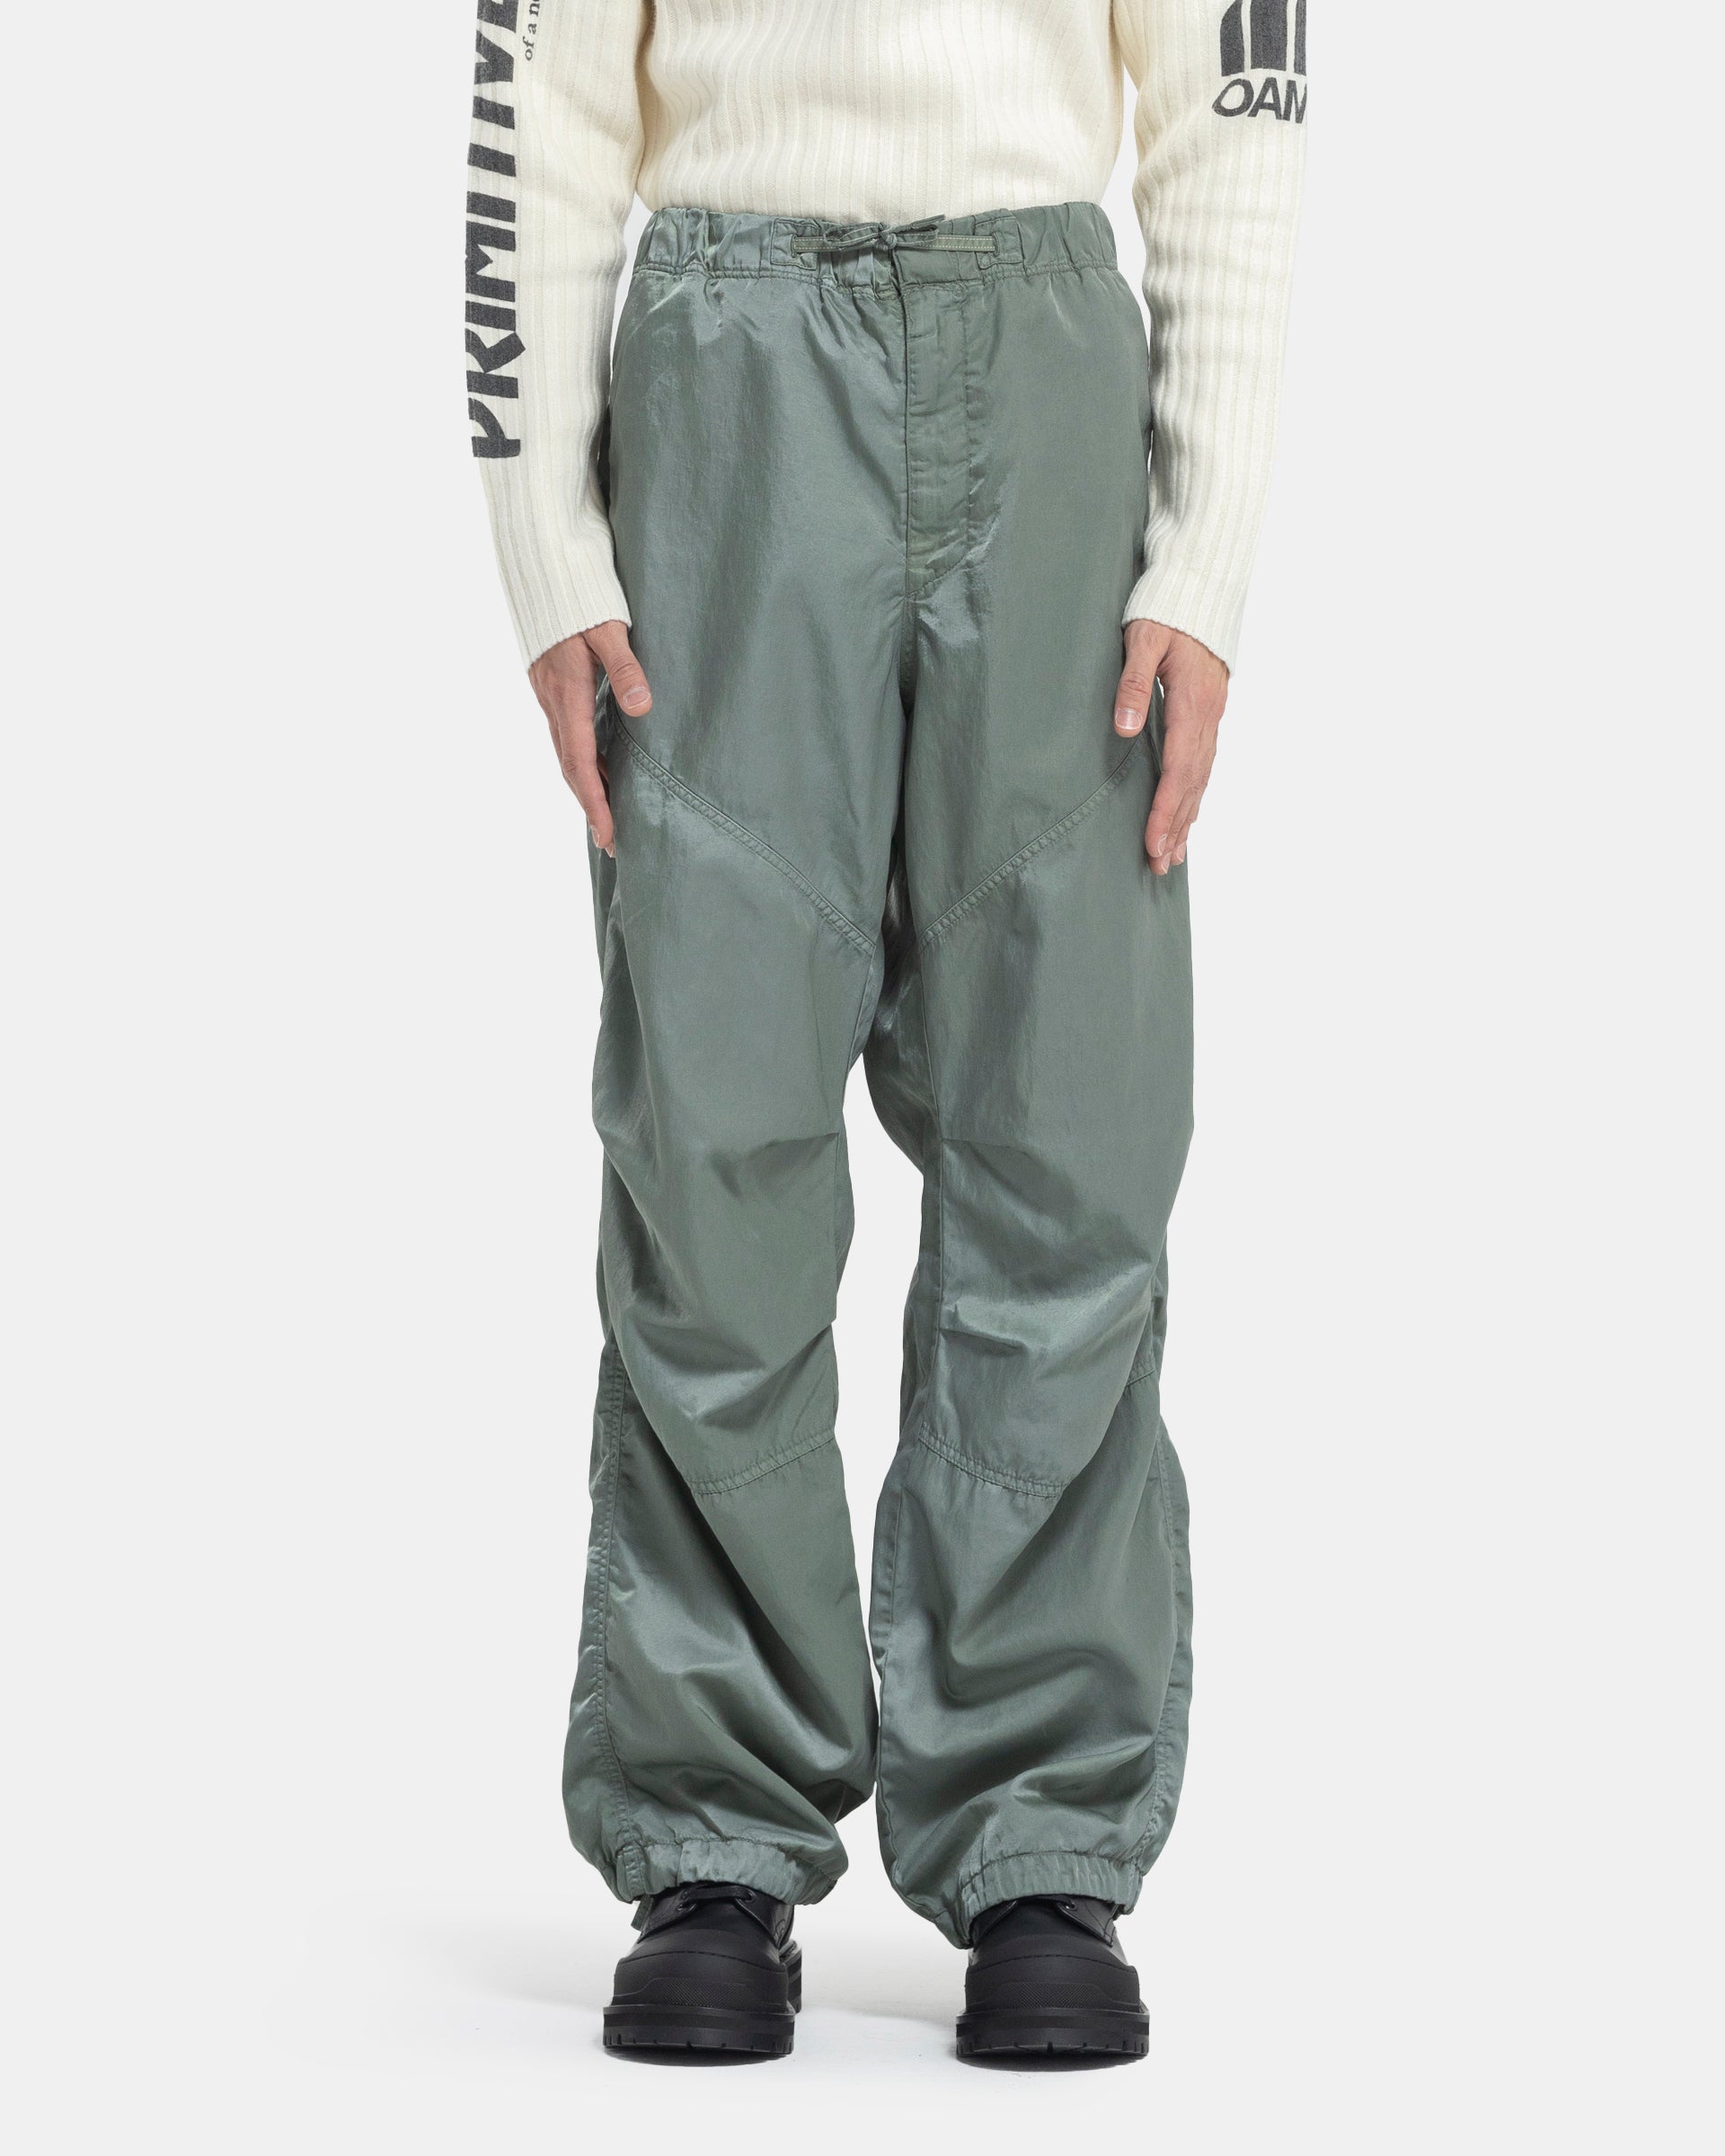 Provo Pants in Hedge Green